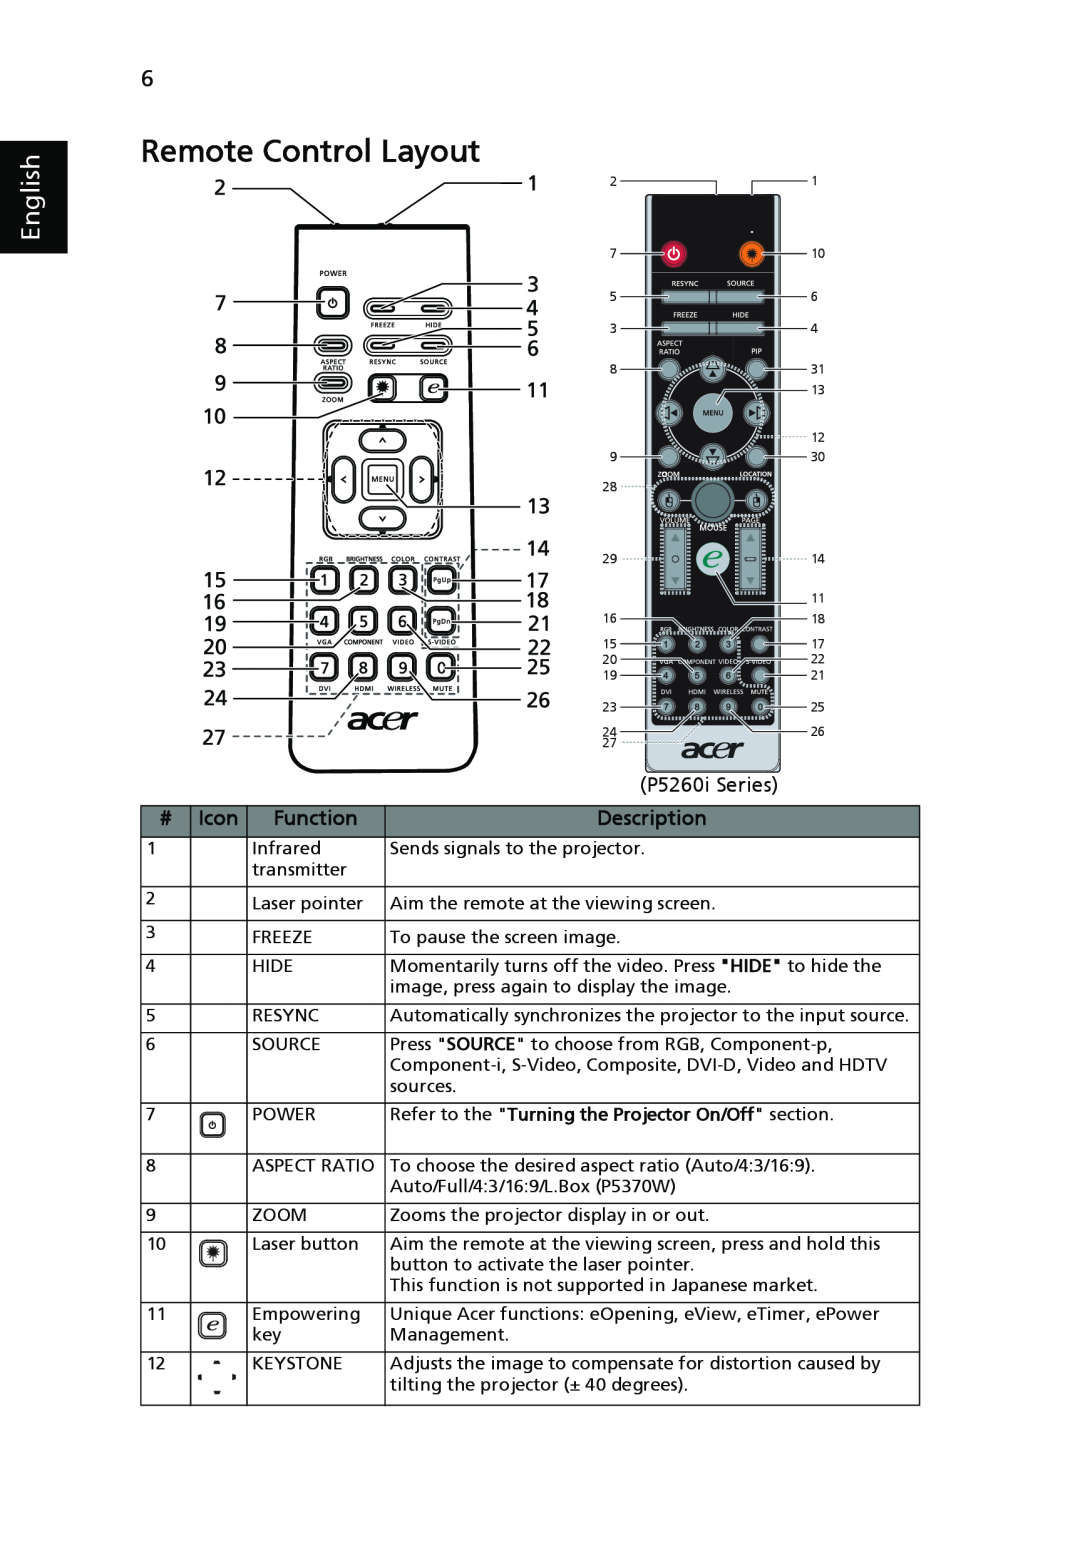 Acer P5270 Remote Control Layout, English, Icon, Function, Description, Refer to the Turning the Projector On/Off section 